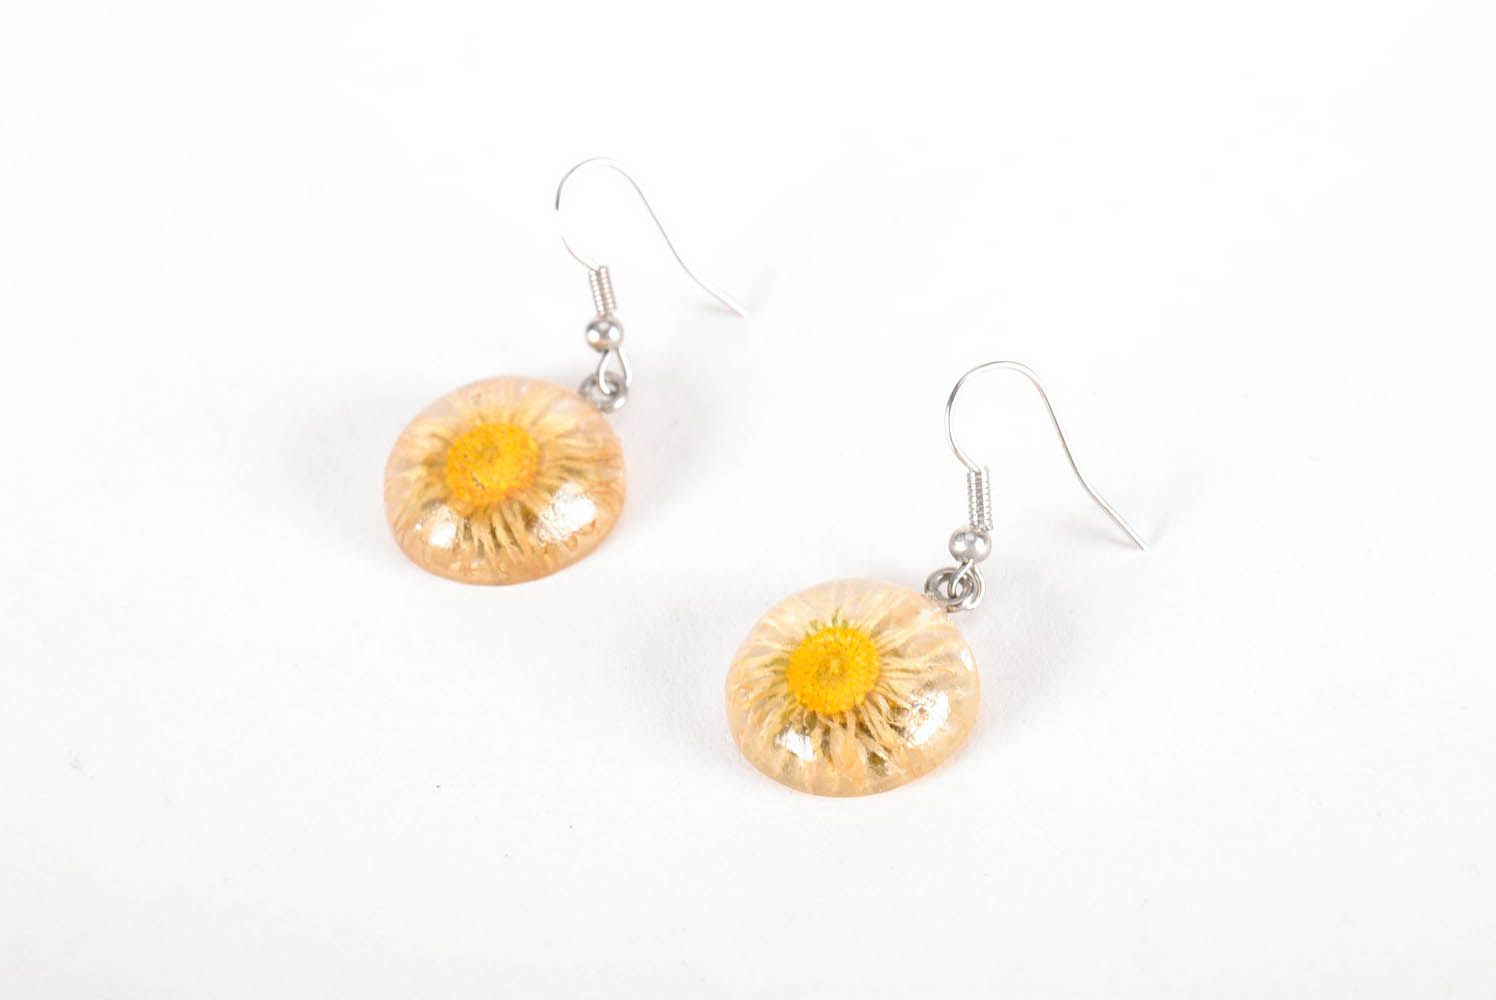 Earrings made of camomiles photo 1